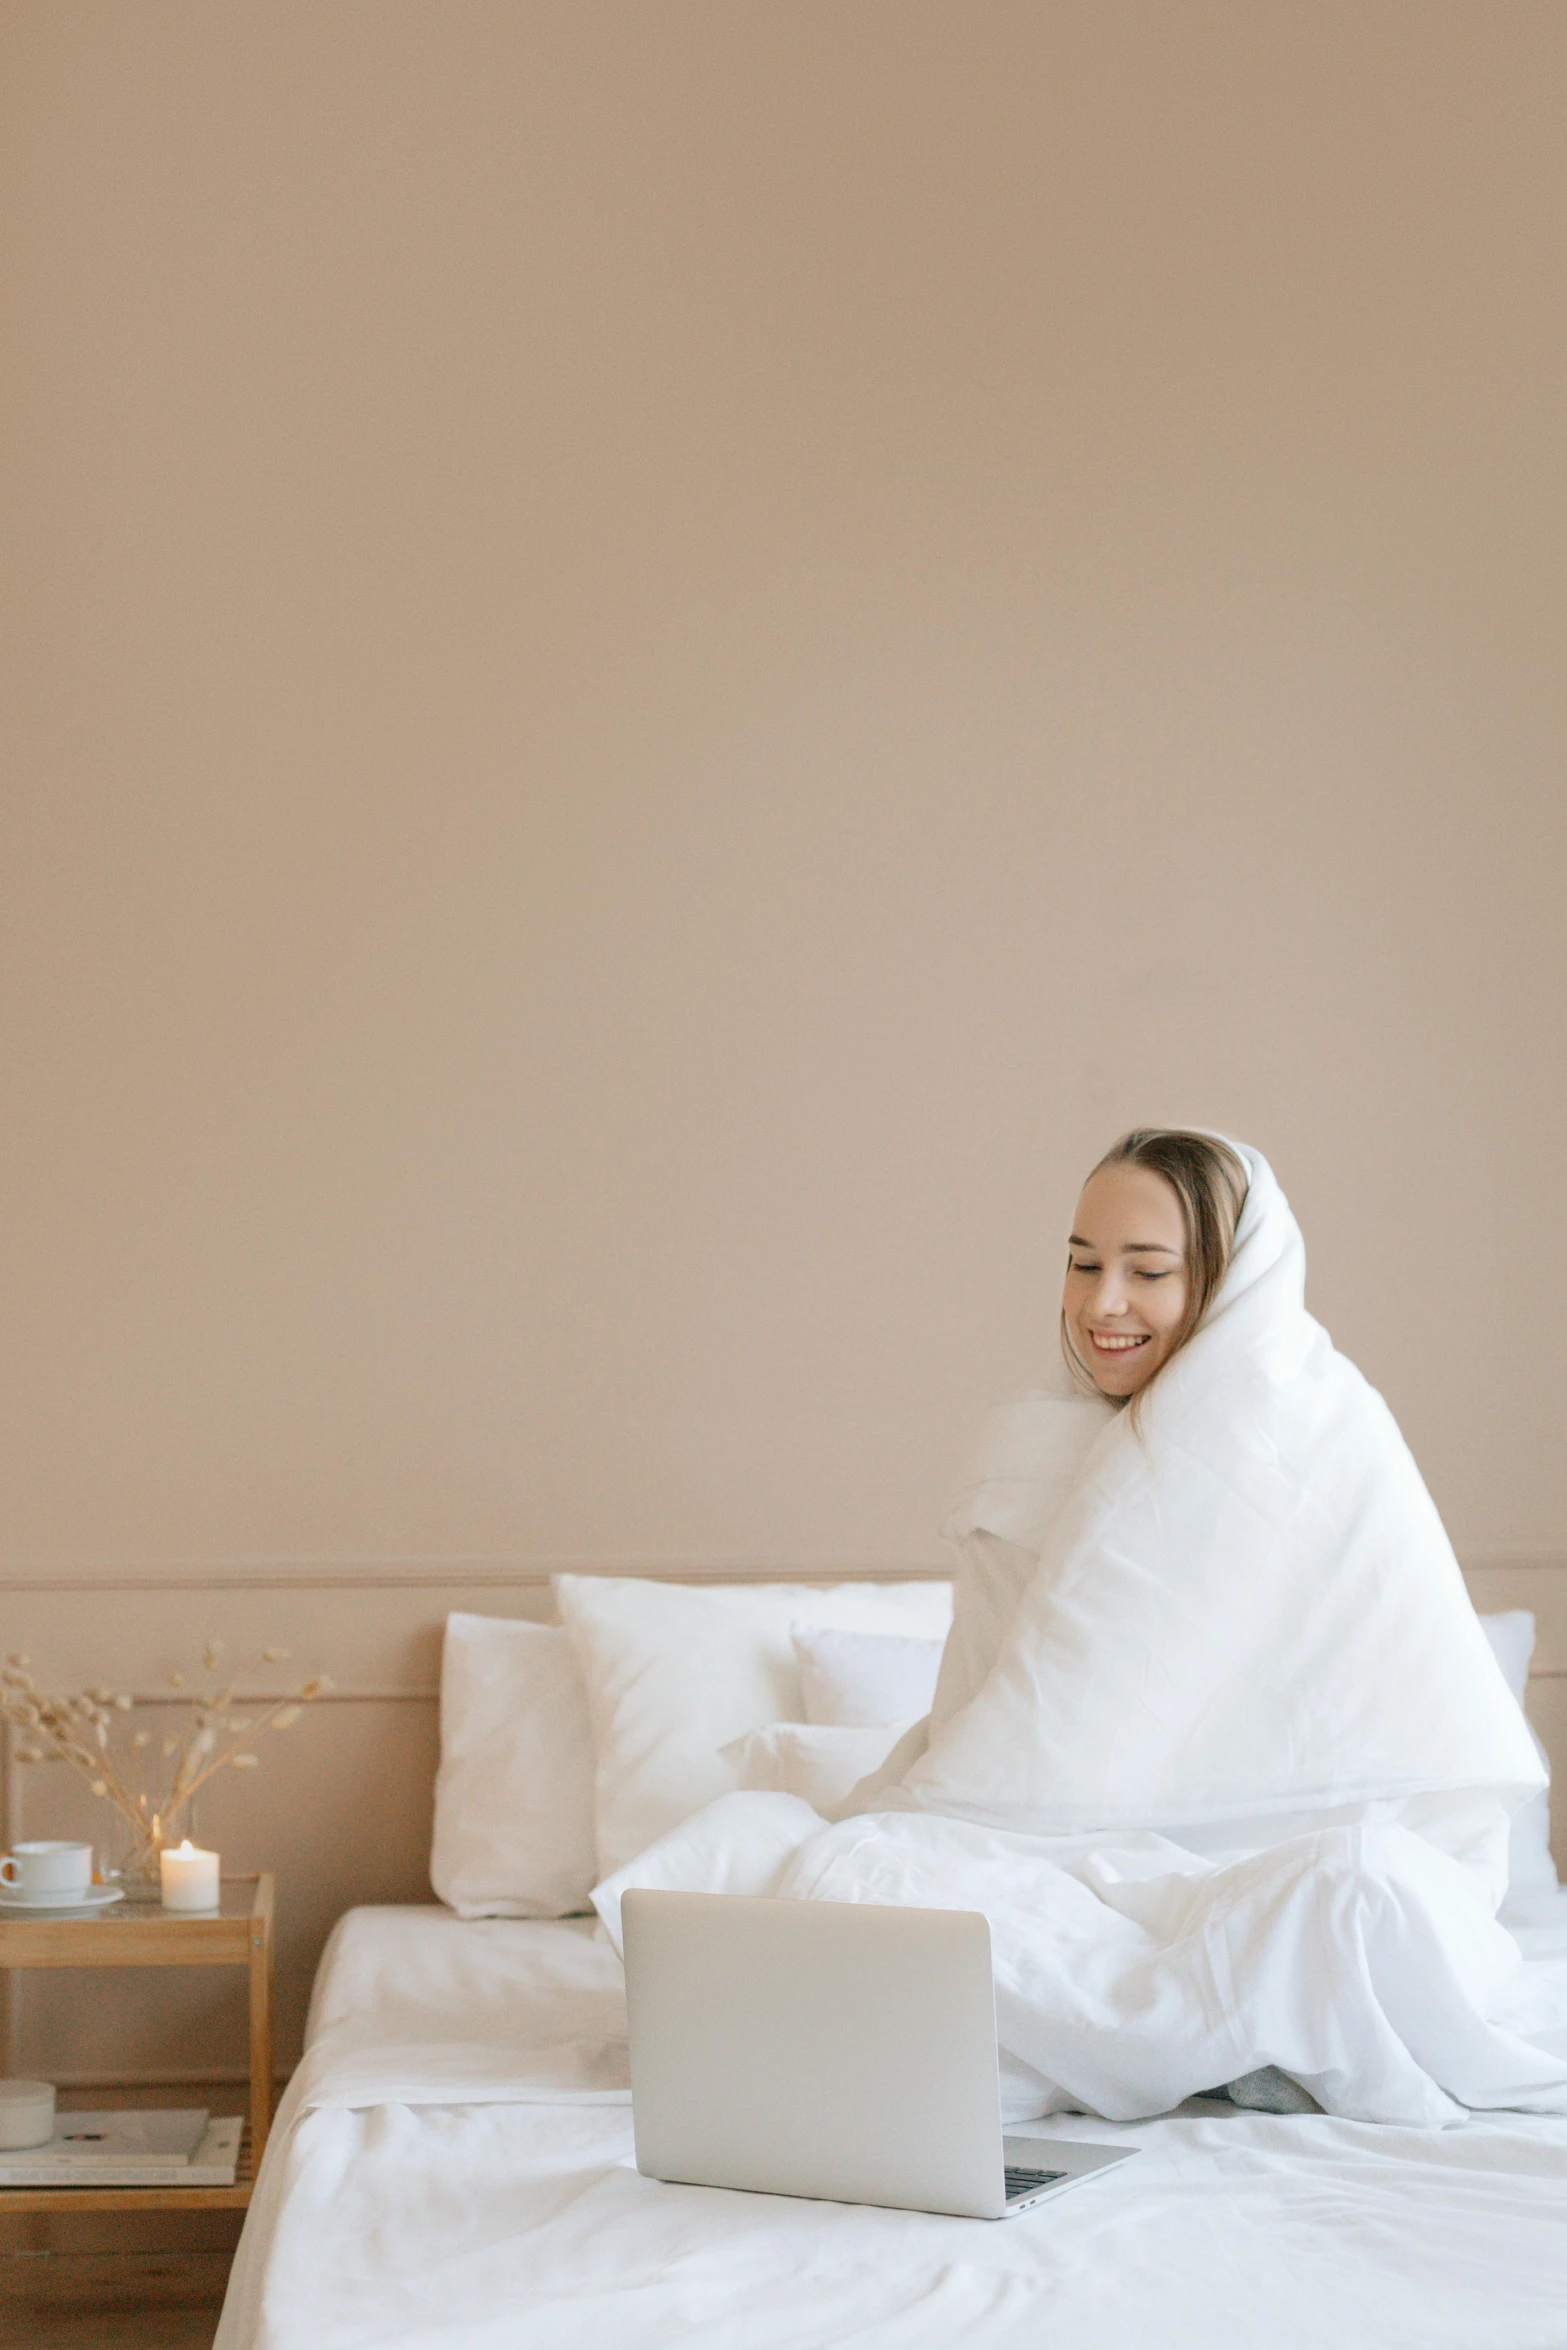 a woman sitting on a bed with a laptop, white cloak, white puffy outfit, wearing a towel, warm and happy